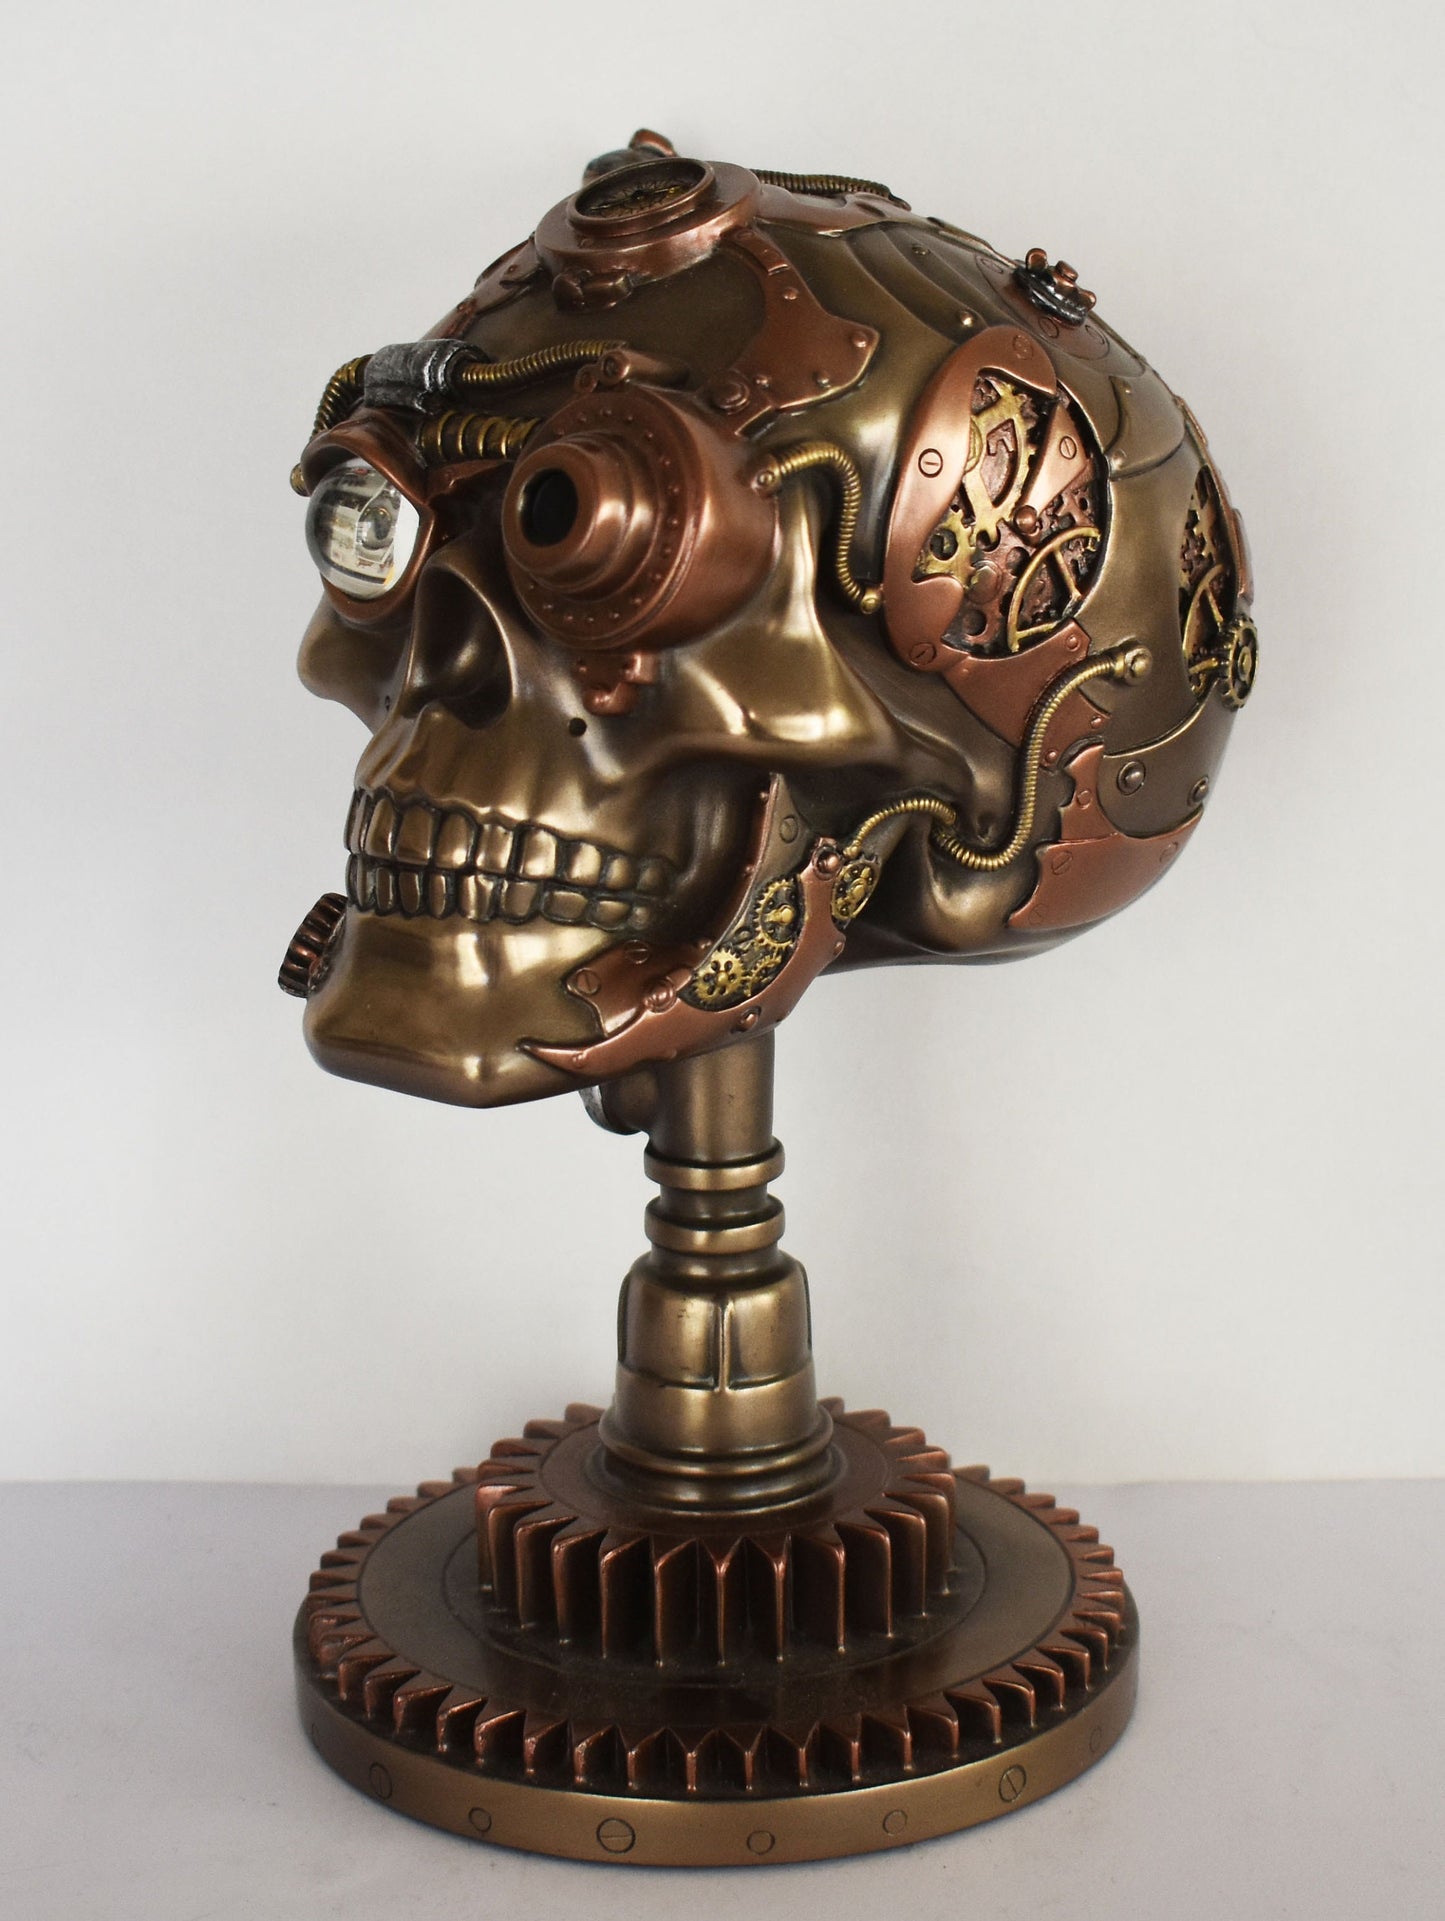 Based Scull  - Steampunk - Modern Art - Decoration - Cold Cast Bronze Resin